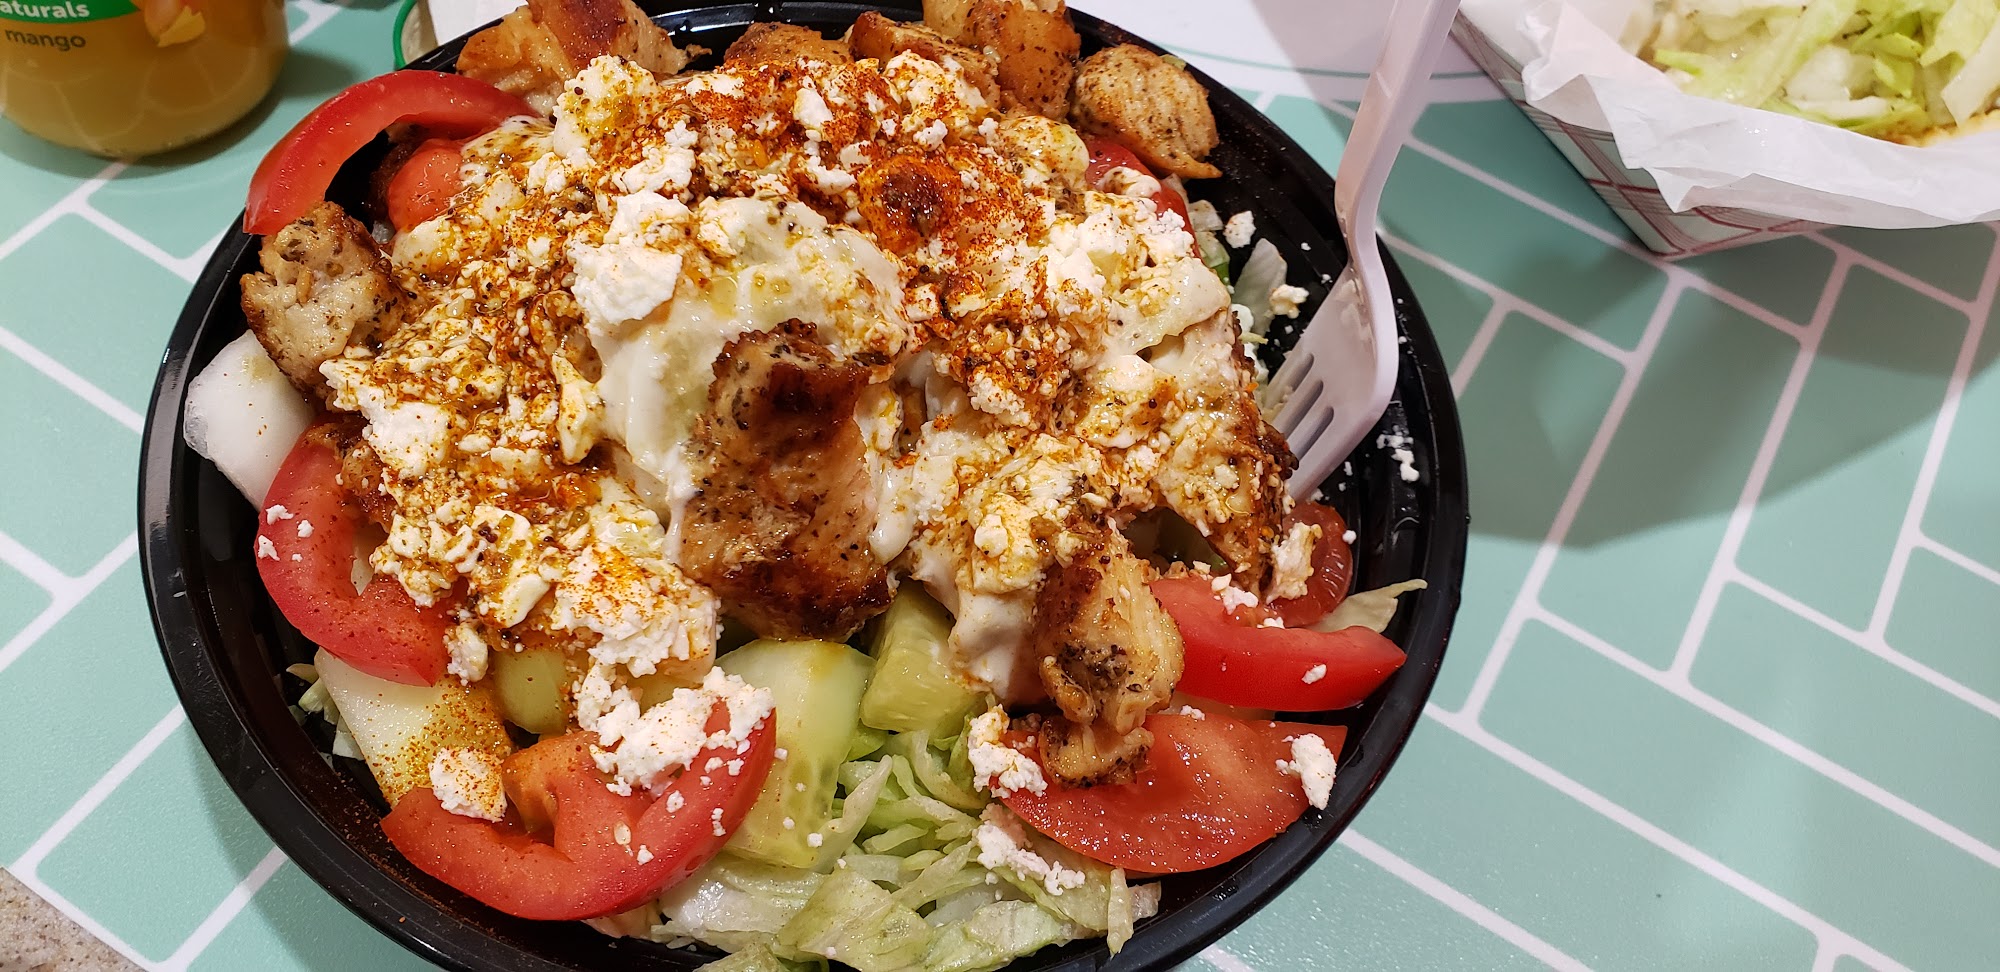 The Greek Pastry Shop - #1 GYROS